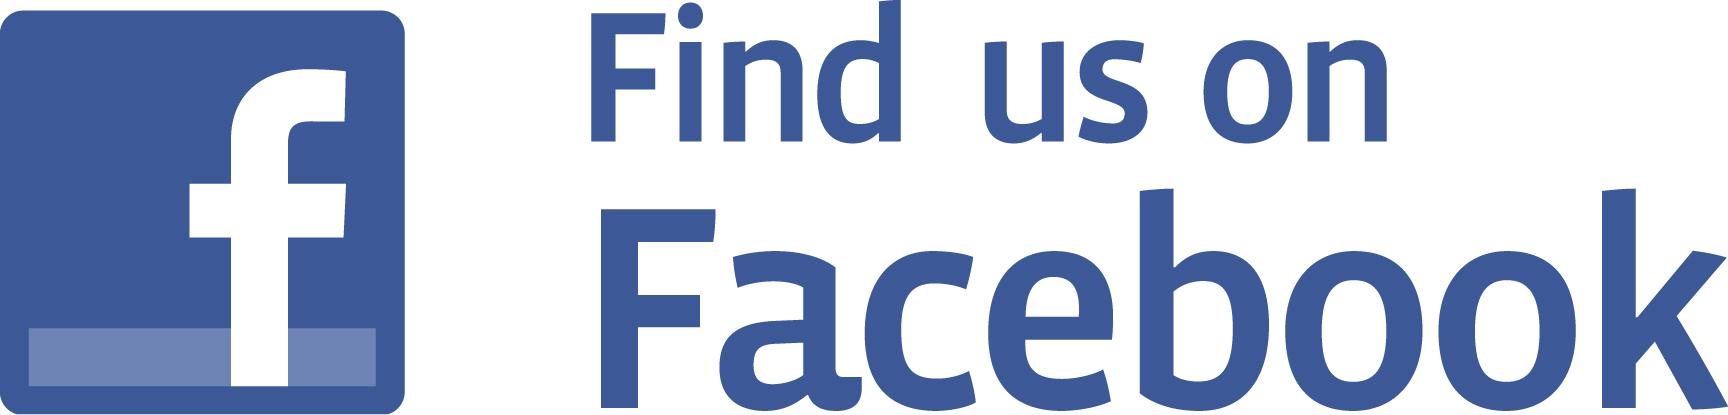 Join Us On Facebook Logo - Stay Connected